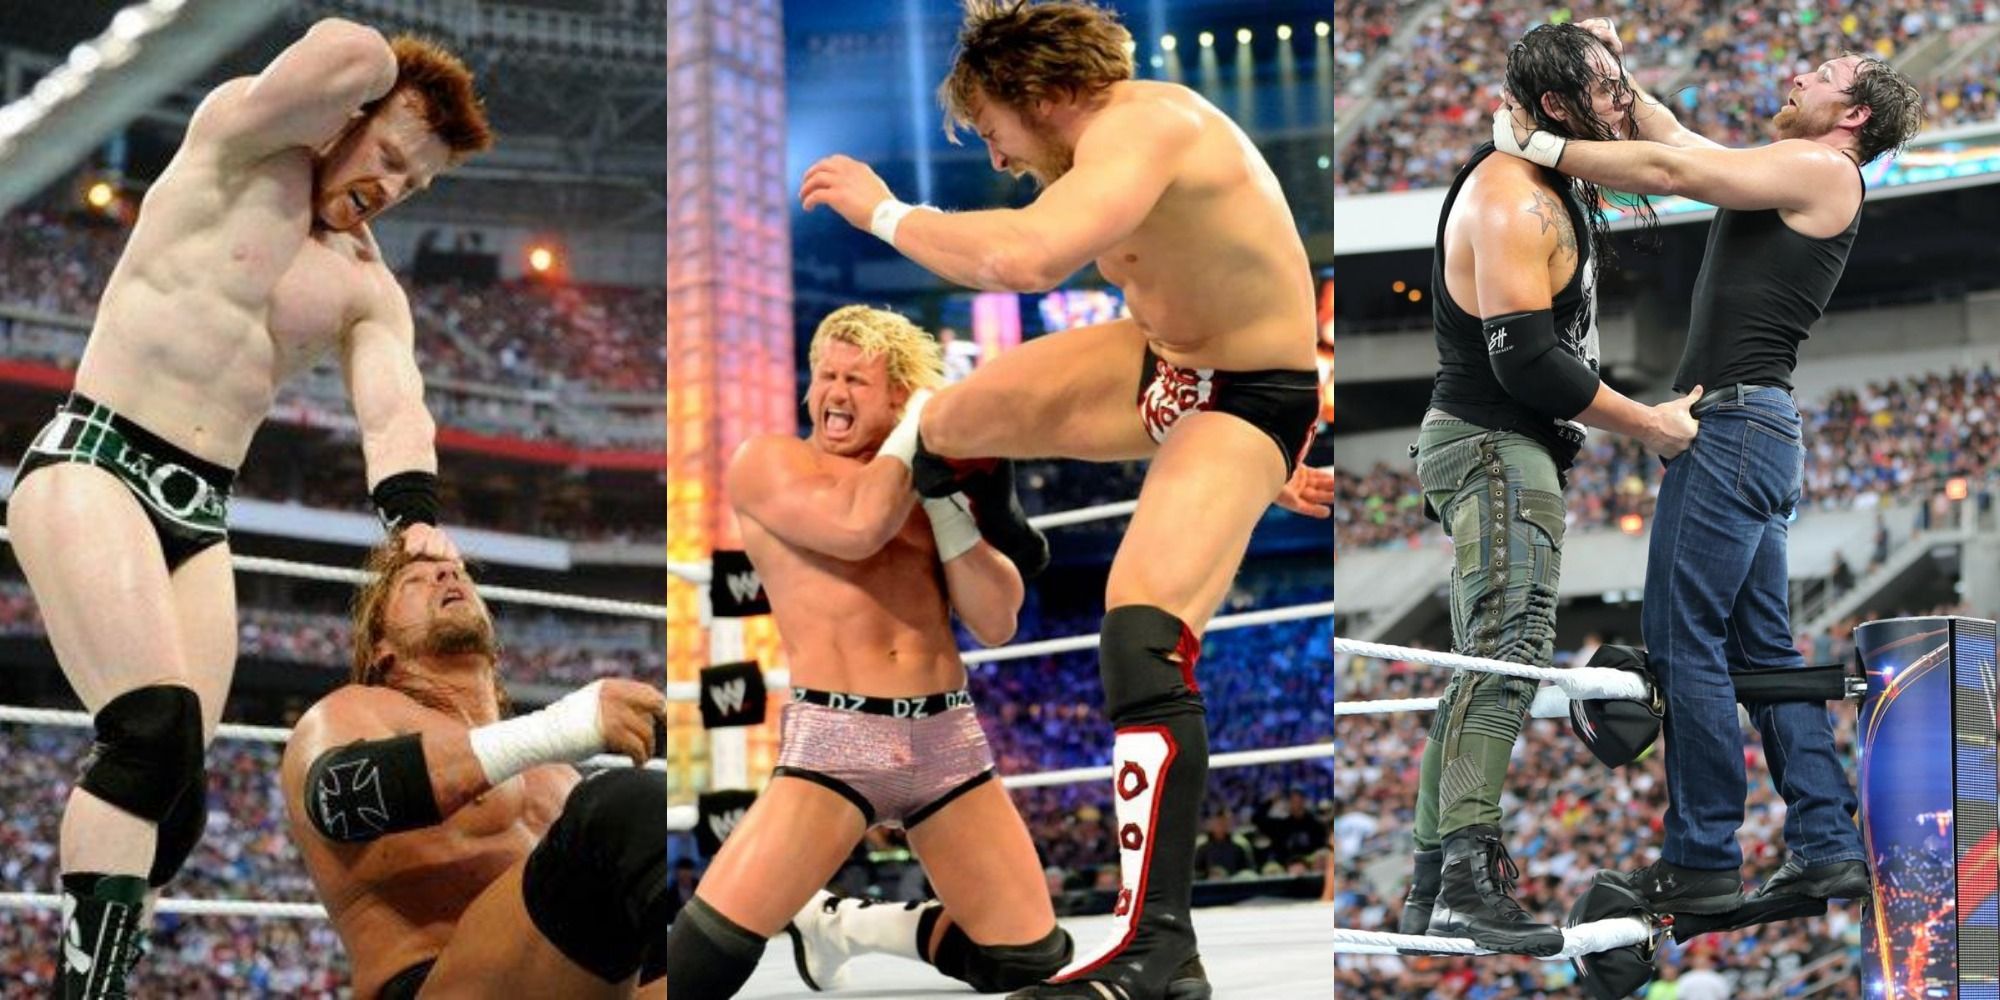 Sheamus elbows Triple H/Daniel Bryan knees Dolph Ziggler/Baron Corbin and Dean Ambrose fight on the top